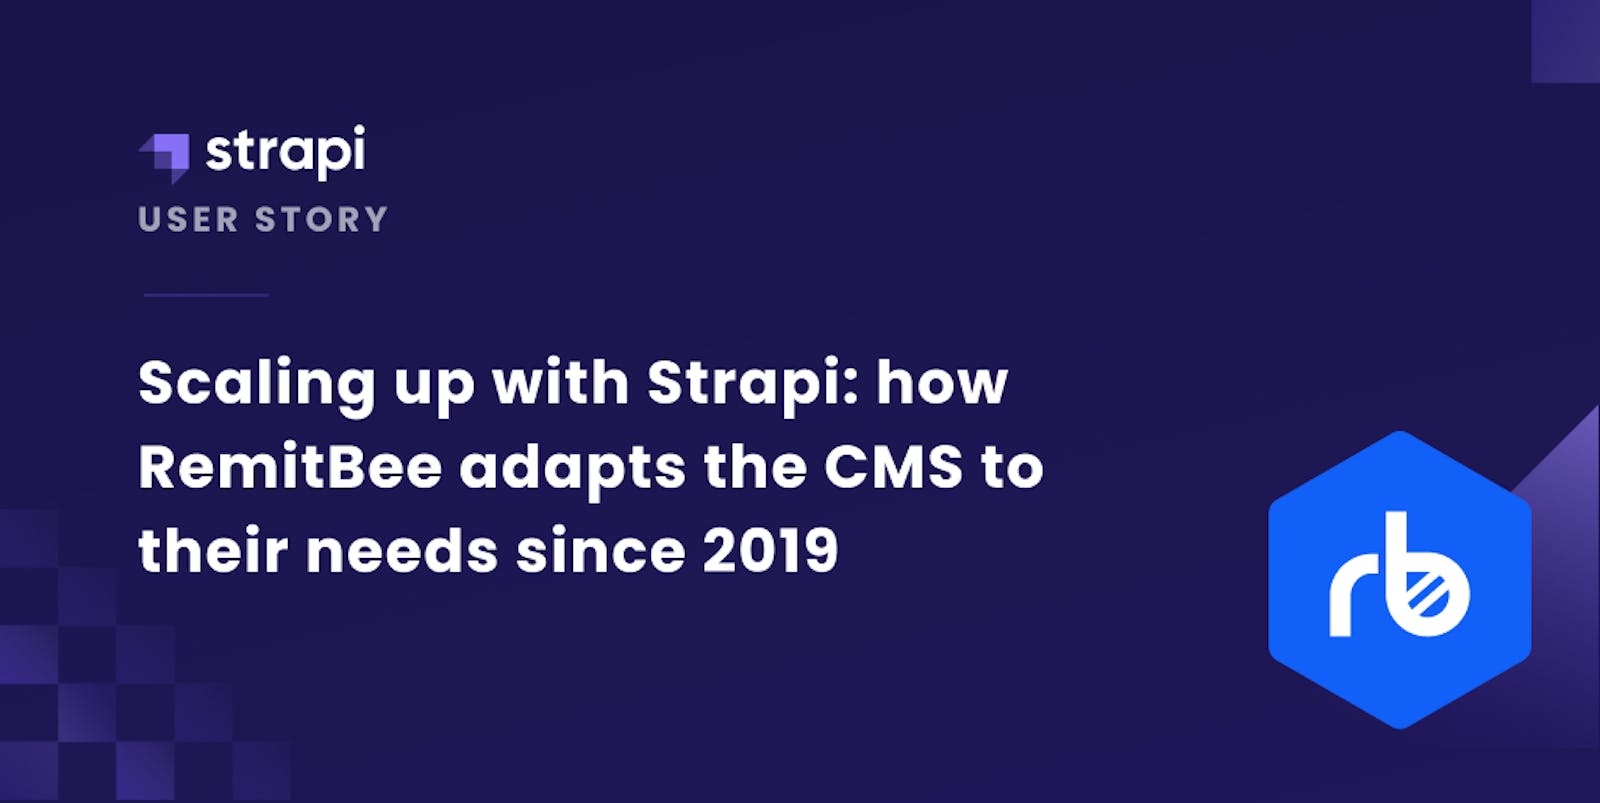 Scaling up with Strapi: how RemitBee adapts the CMS to their needs since 2019